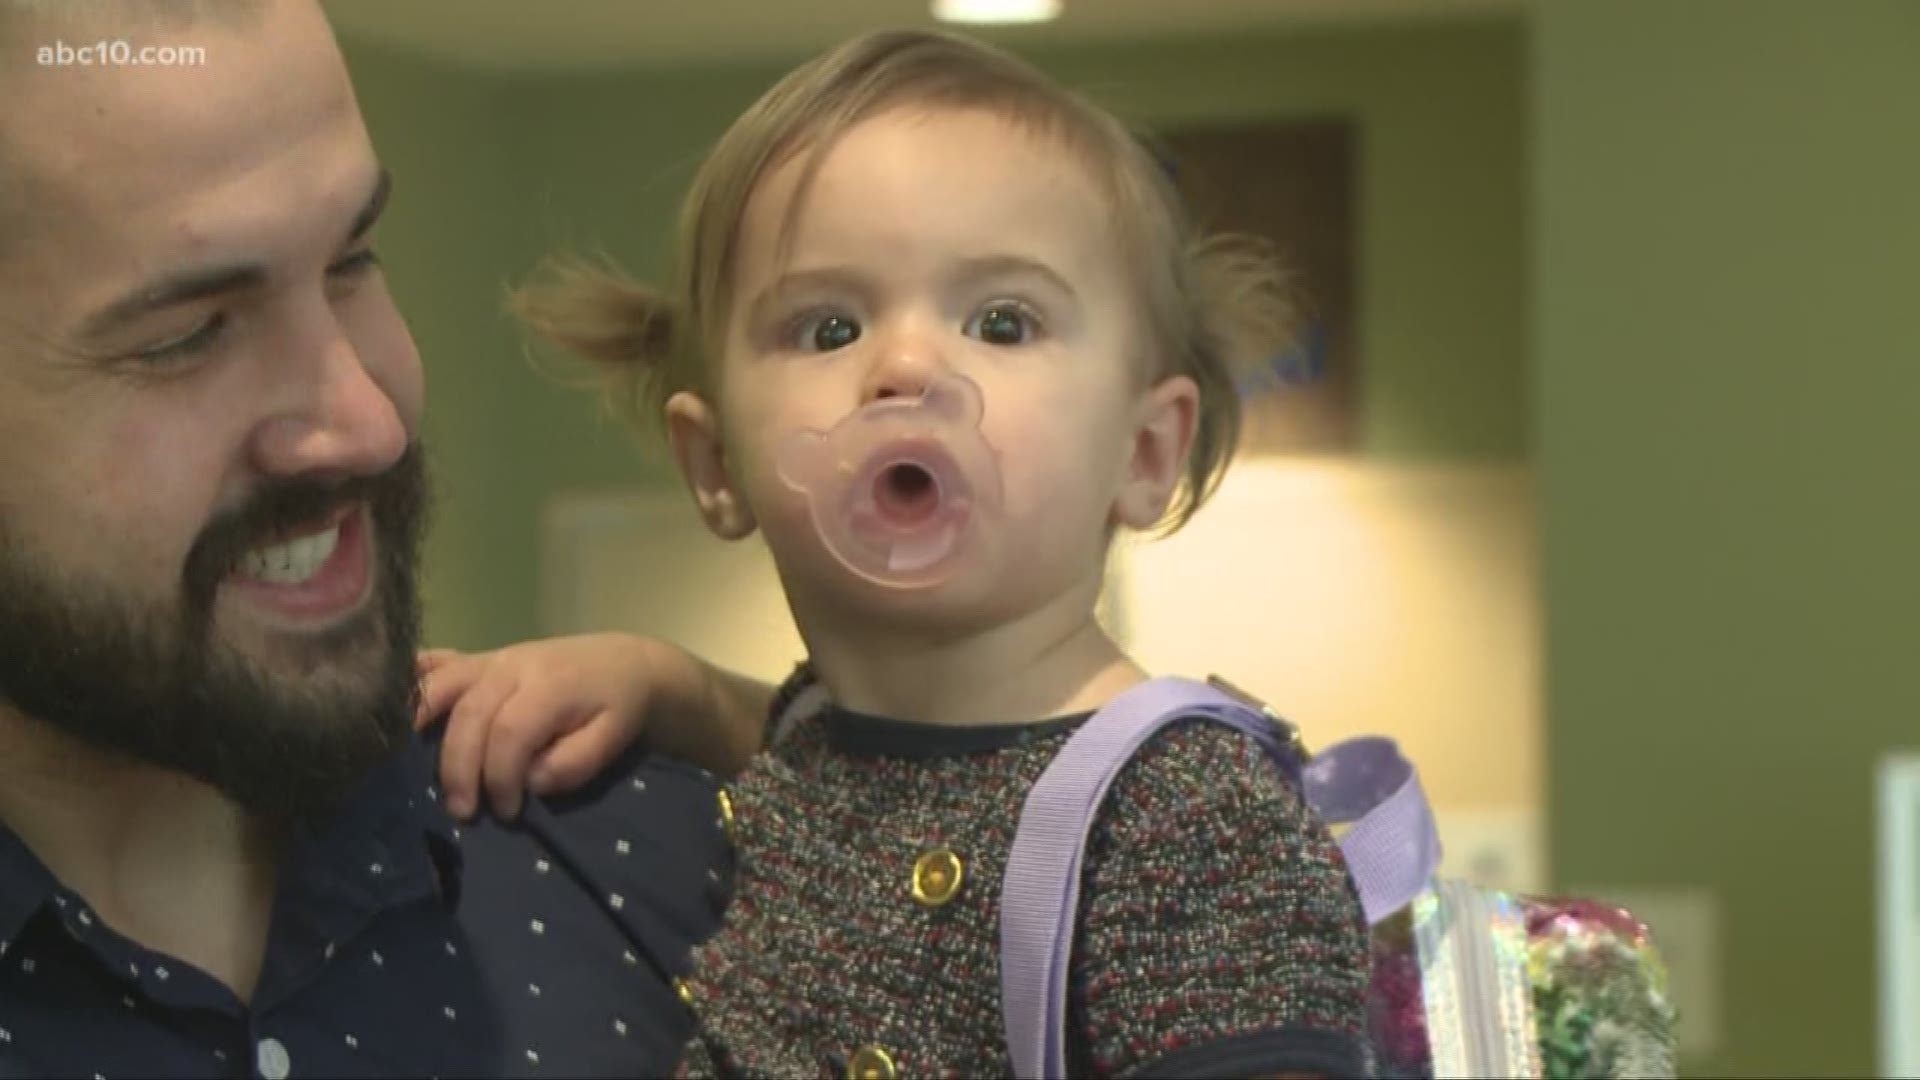 While Sacramento's Sutter Children's Center may see cases of airway obstructions once every several months, their Pediatric ICU Medical Director says he had not seen a case as severe as Evie Sayers' in his 18 years at the hospital.